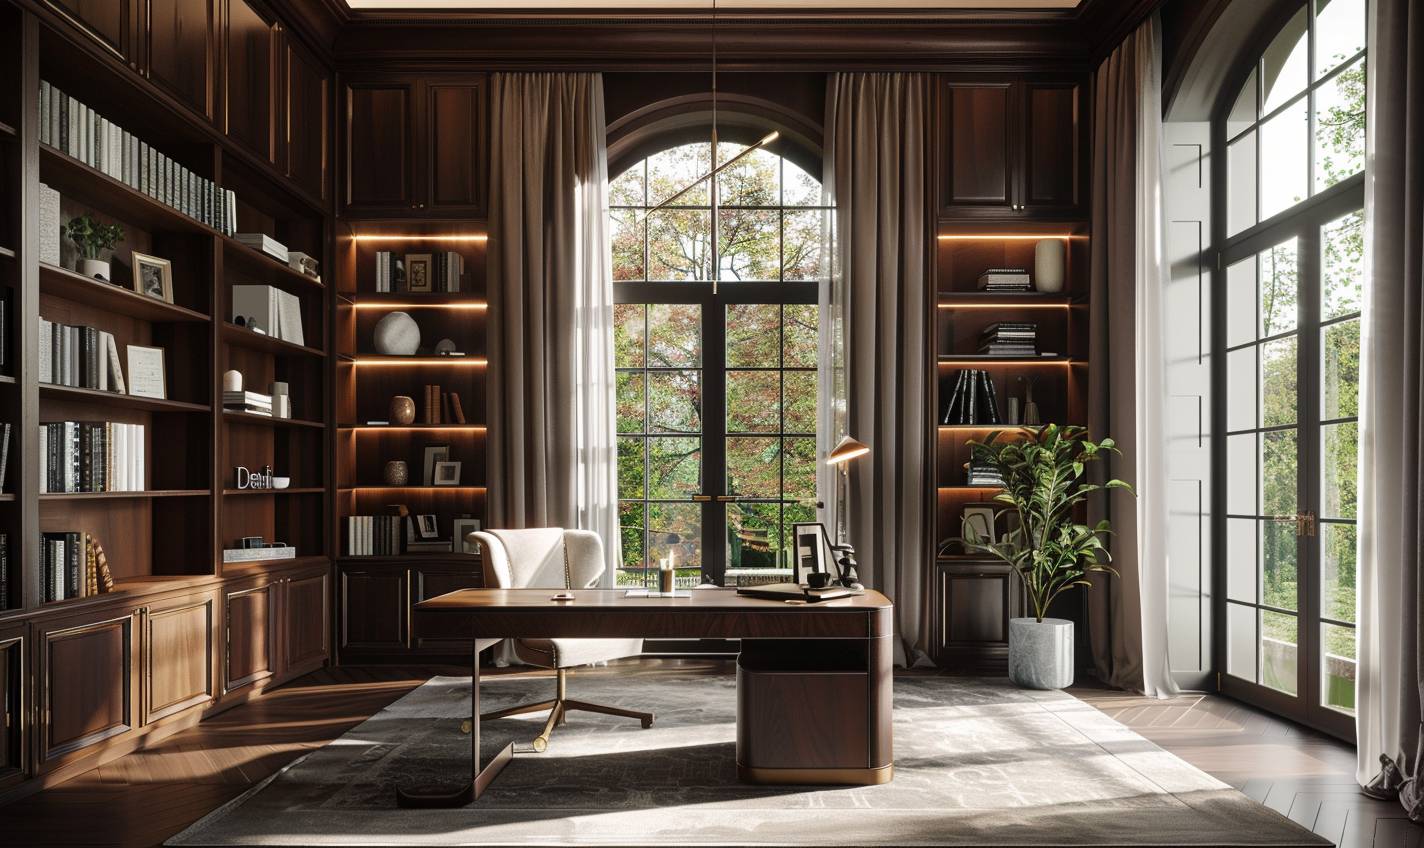 Interior Design, a perspective of of a study room with mahogany walls and a large desk of walnut wood, large windows with natural light, Light colors, plants, modern furniture, classical interior design